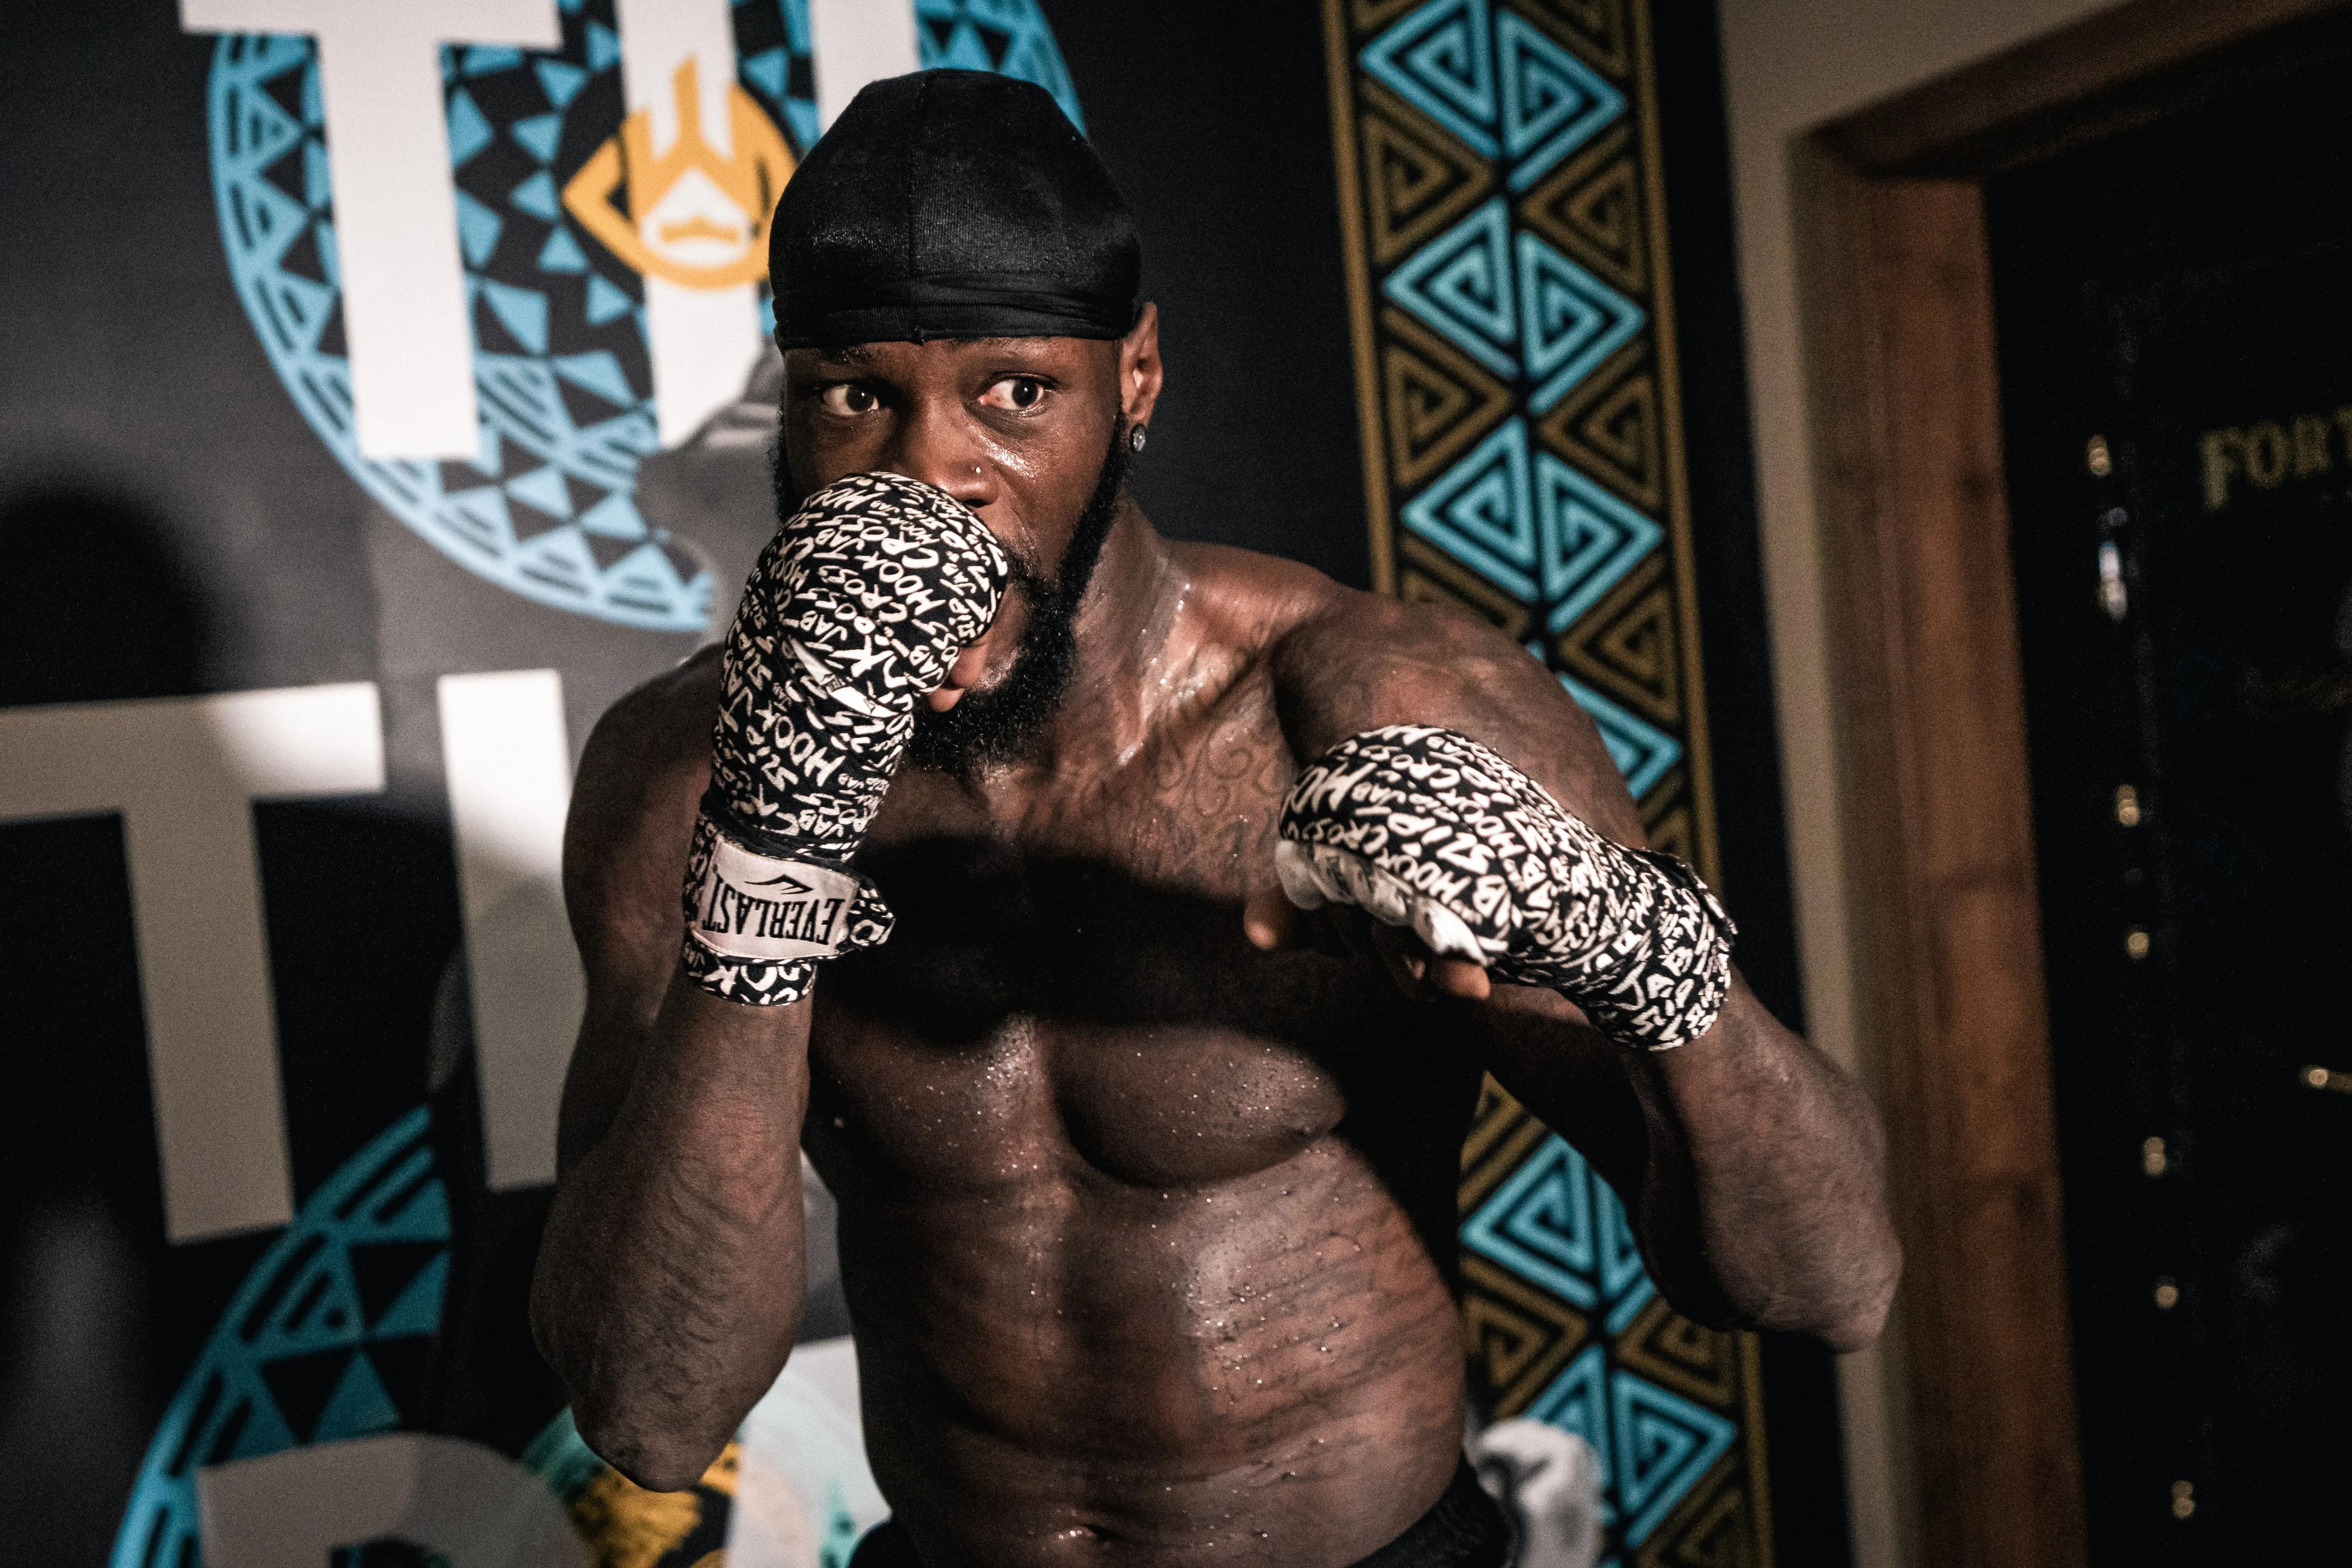 Deontay Wilder: 'There is no thrill in the heavyweight division' as he disapproves of Fury-Ngannou